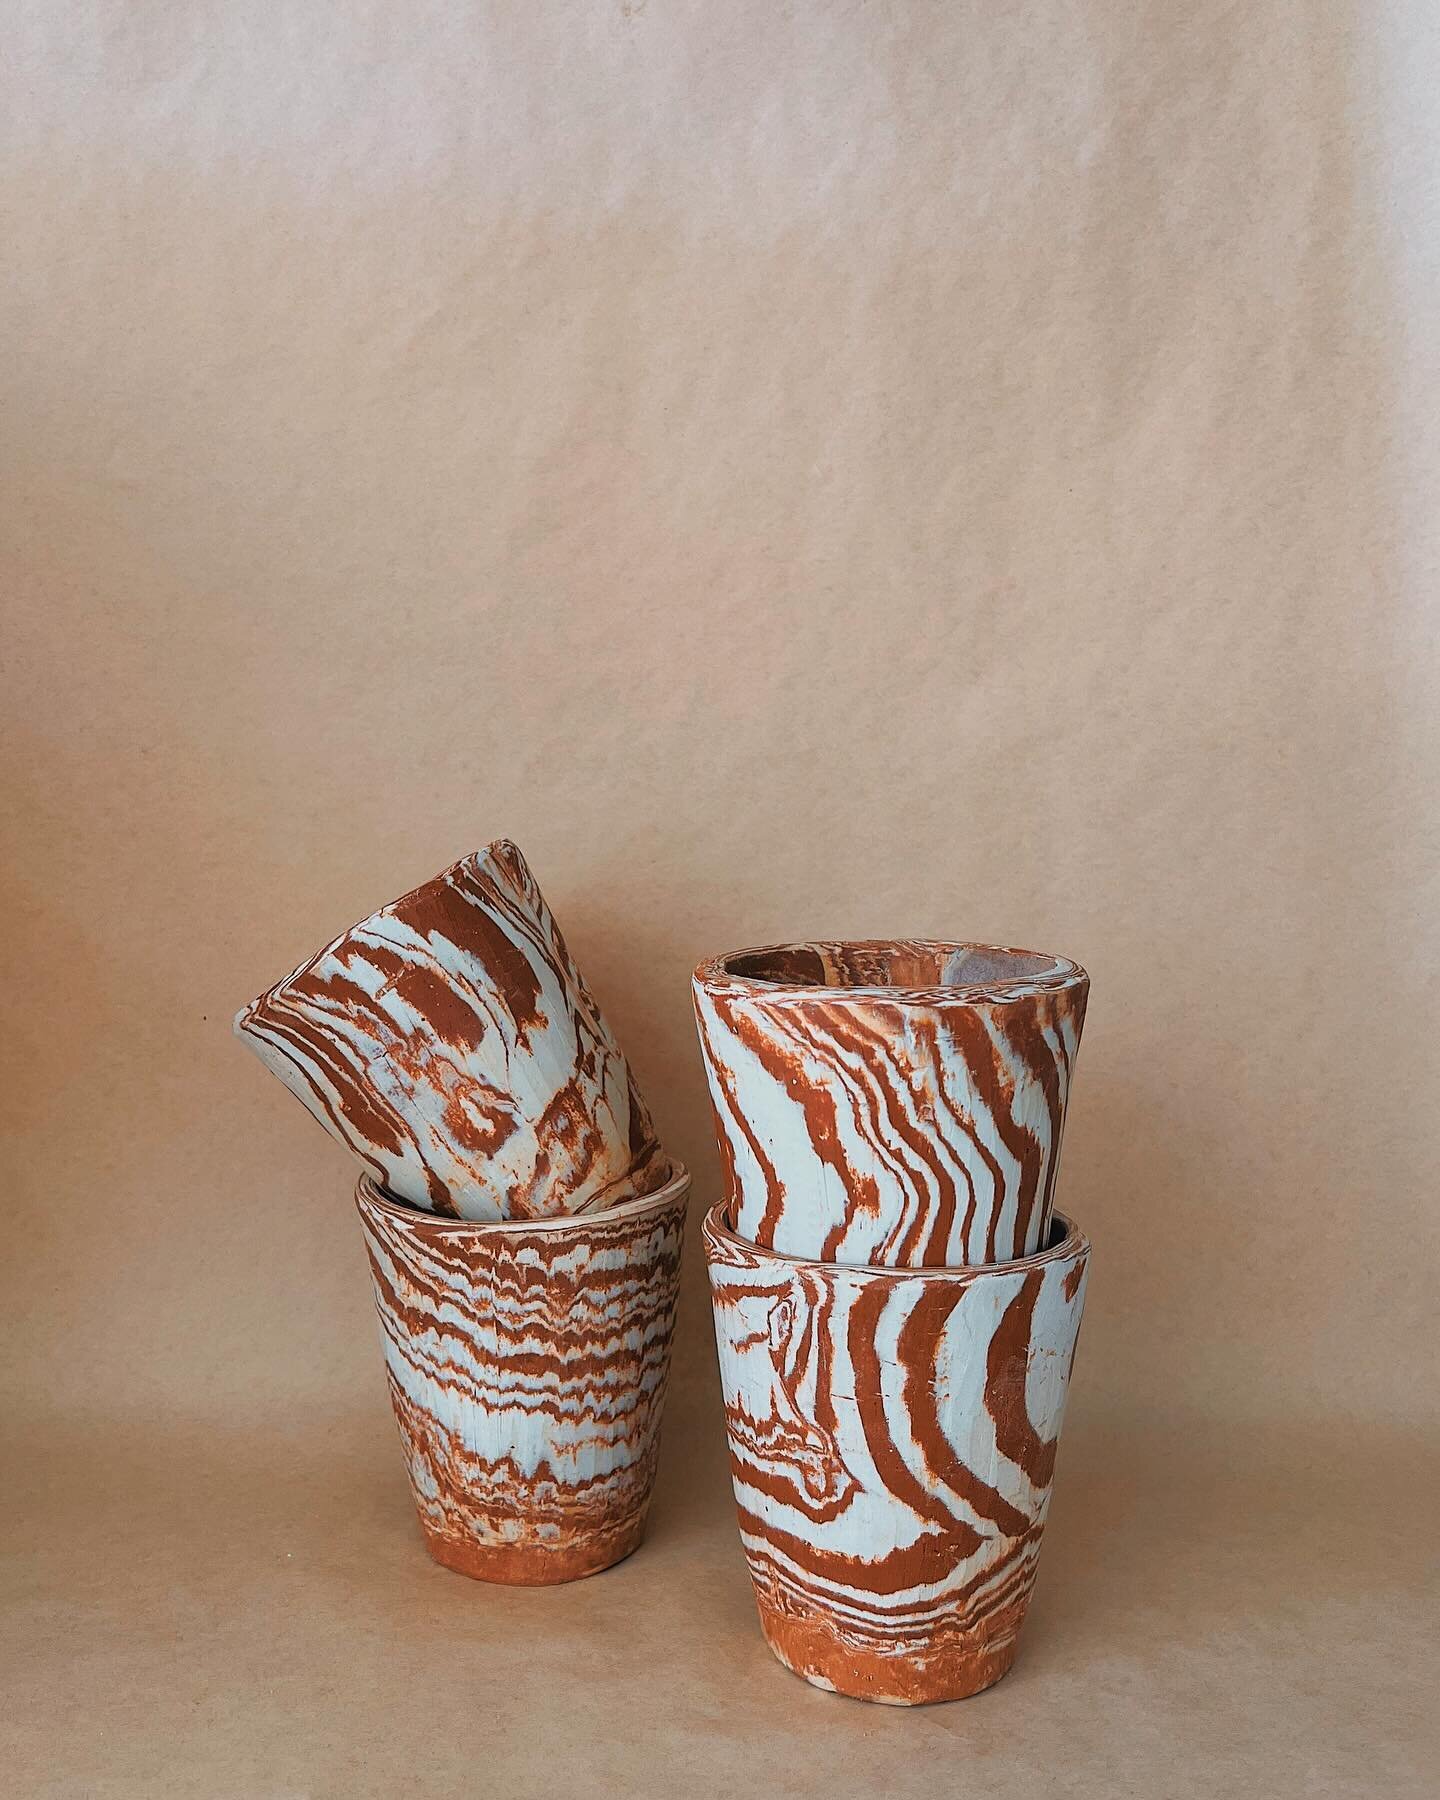 Cups anyone? 

Making a whole heap of these to have available in sets when I have a large enough inventory!